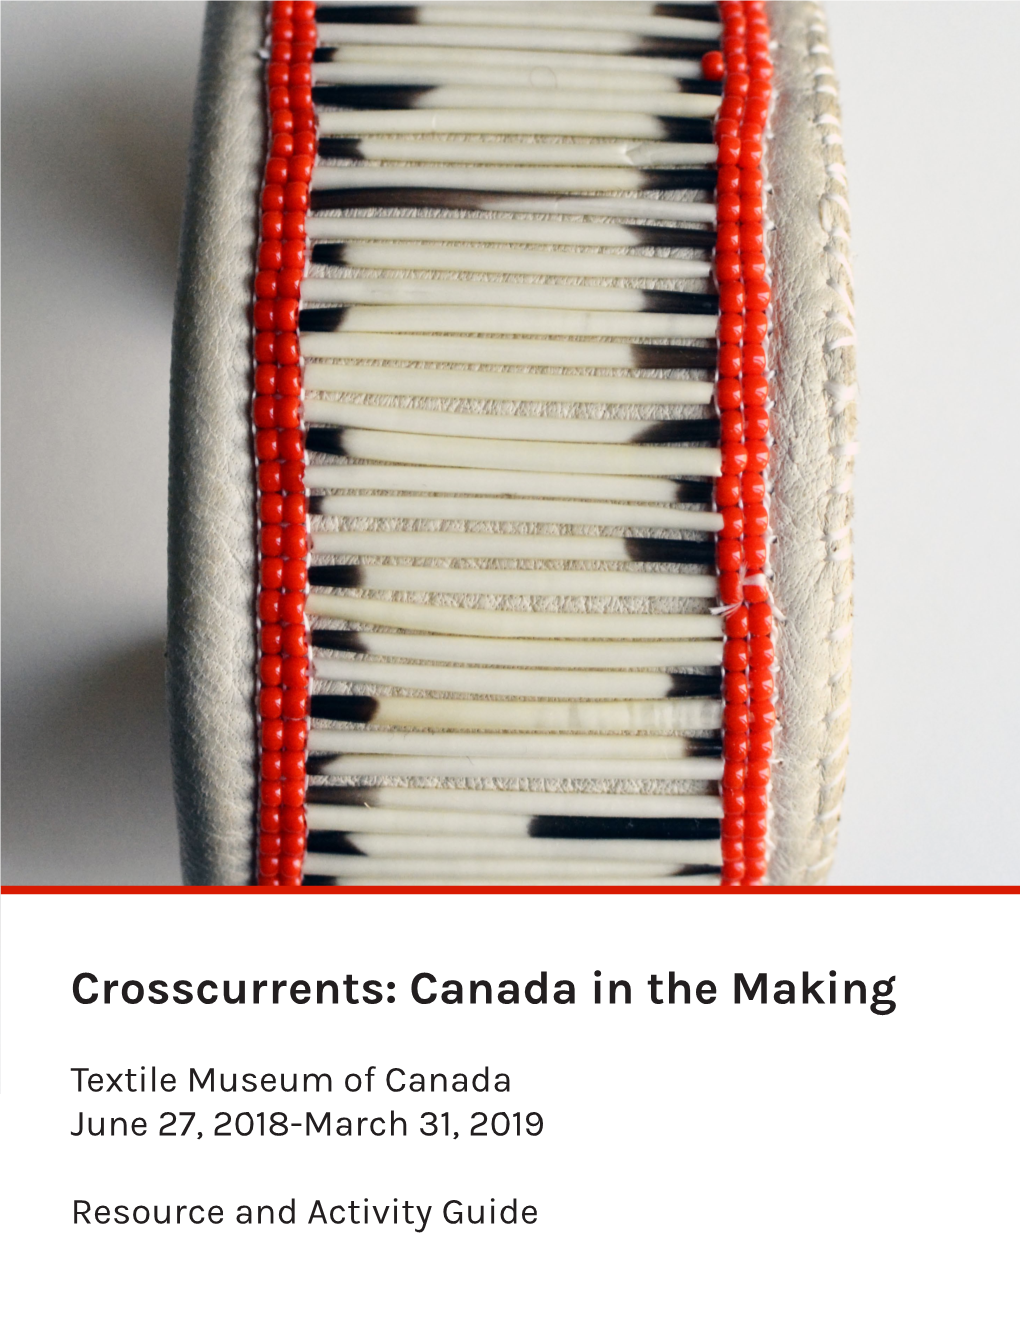 Crosscurrents: Canada in the Making